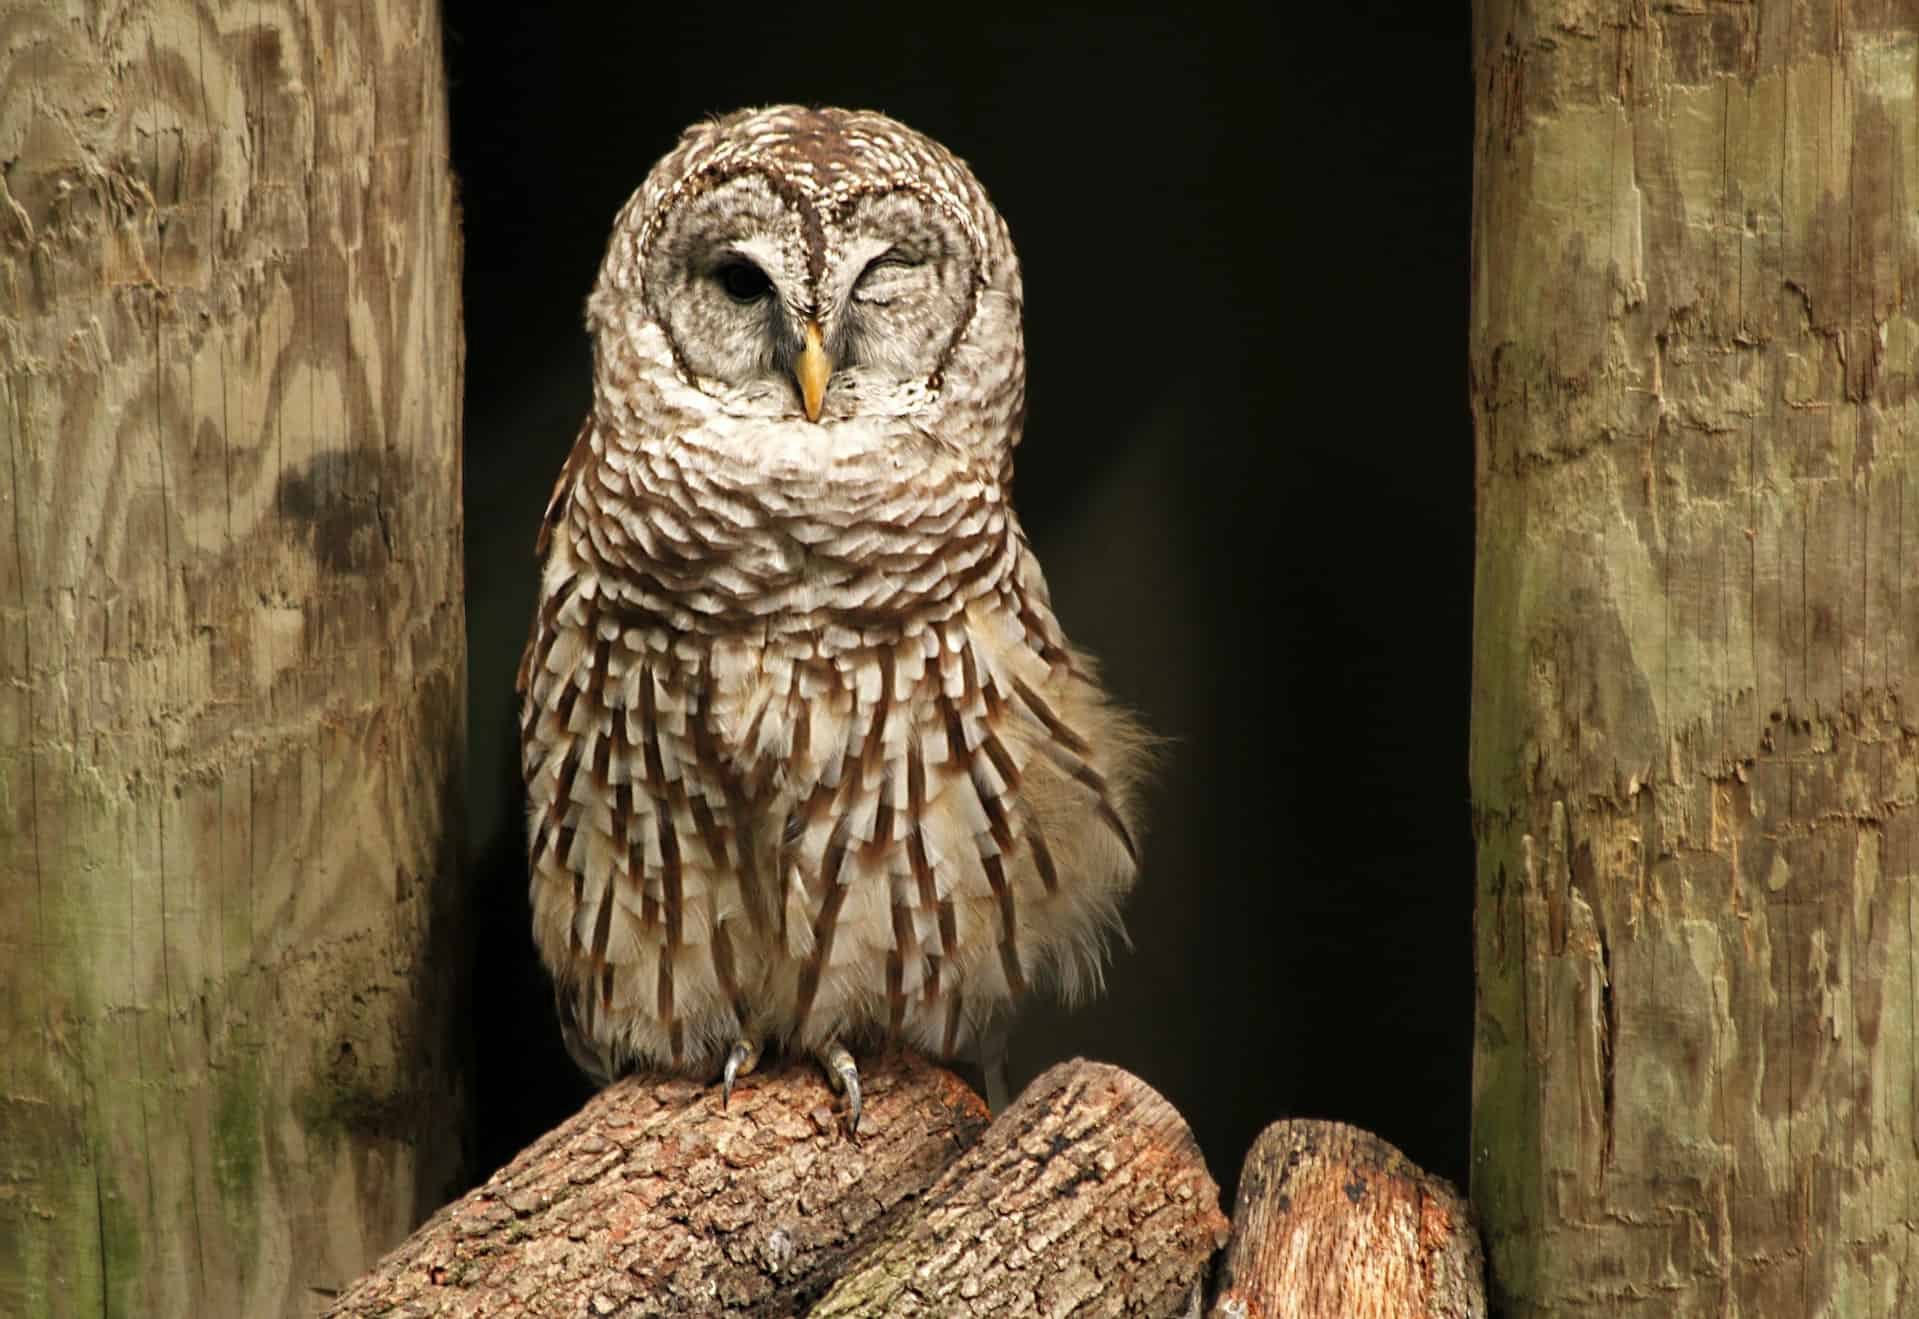 why do owls sleep during the day